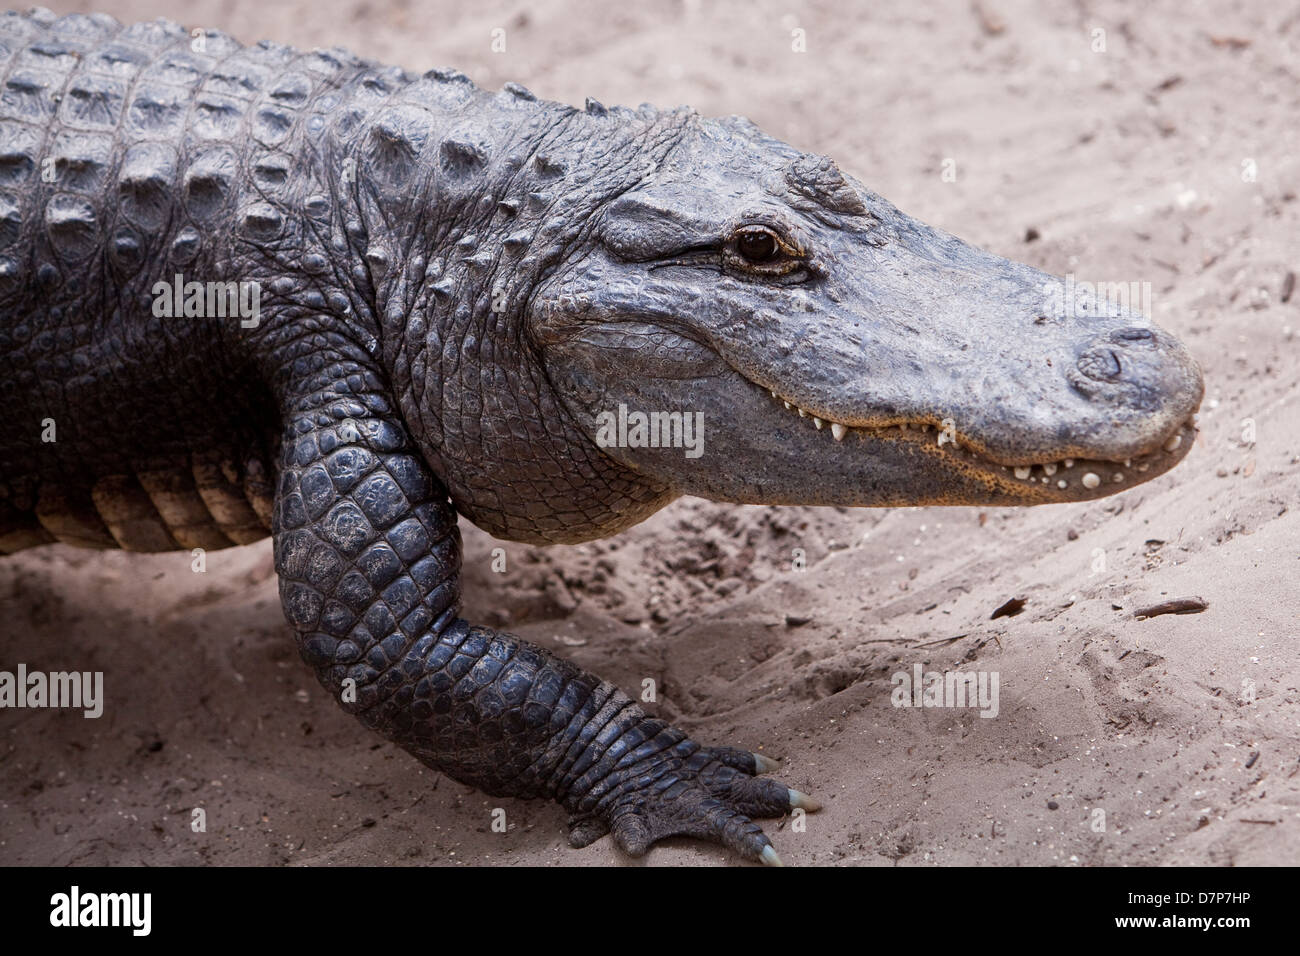 An american alligator is seen at Alligator farm Zoological Park in St. Augustine, Florida Stock Photo